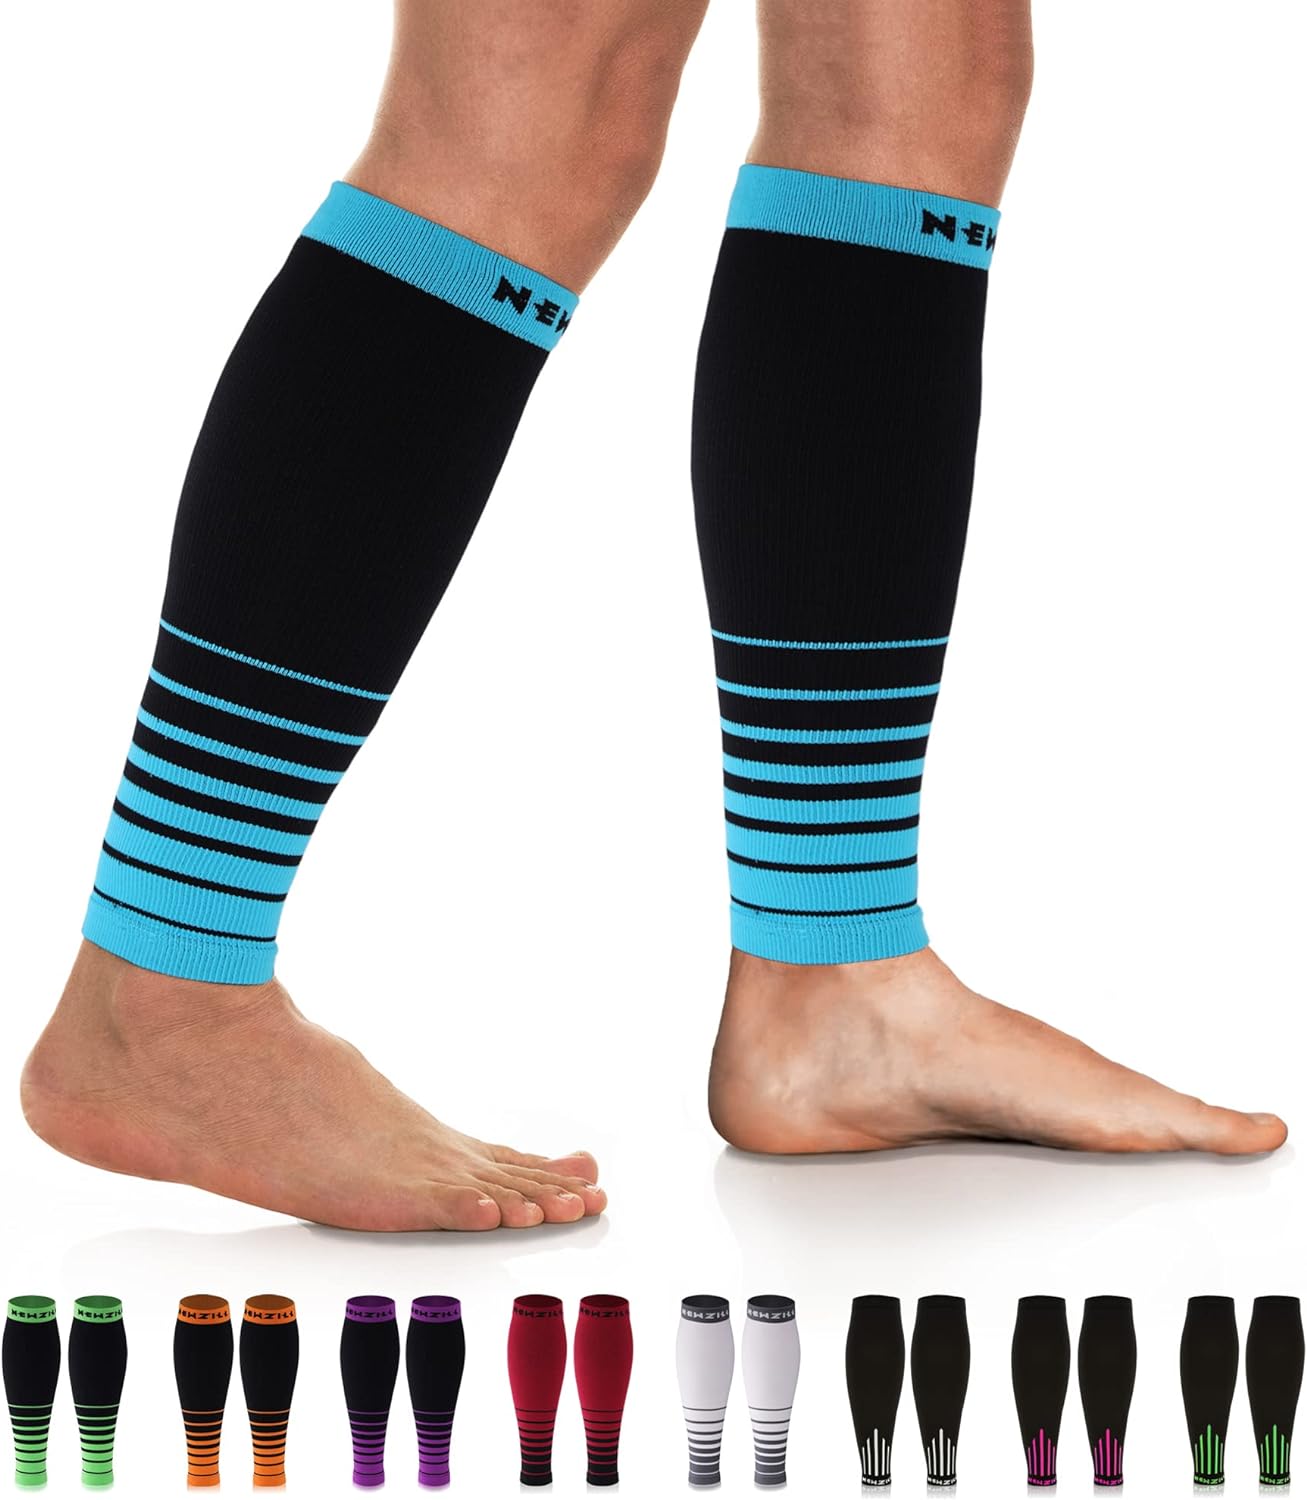 NEWZILL Compression Calf Sleeves Review